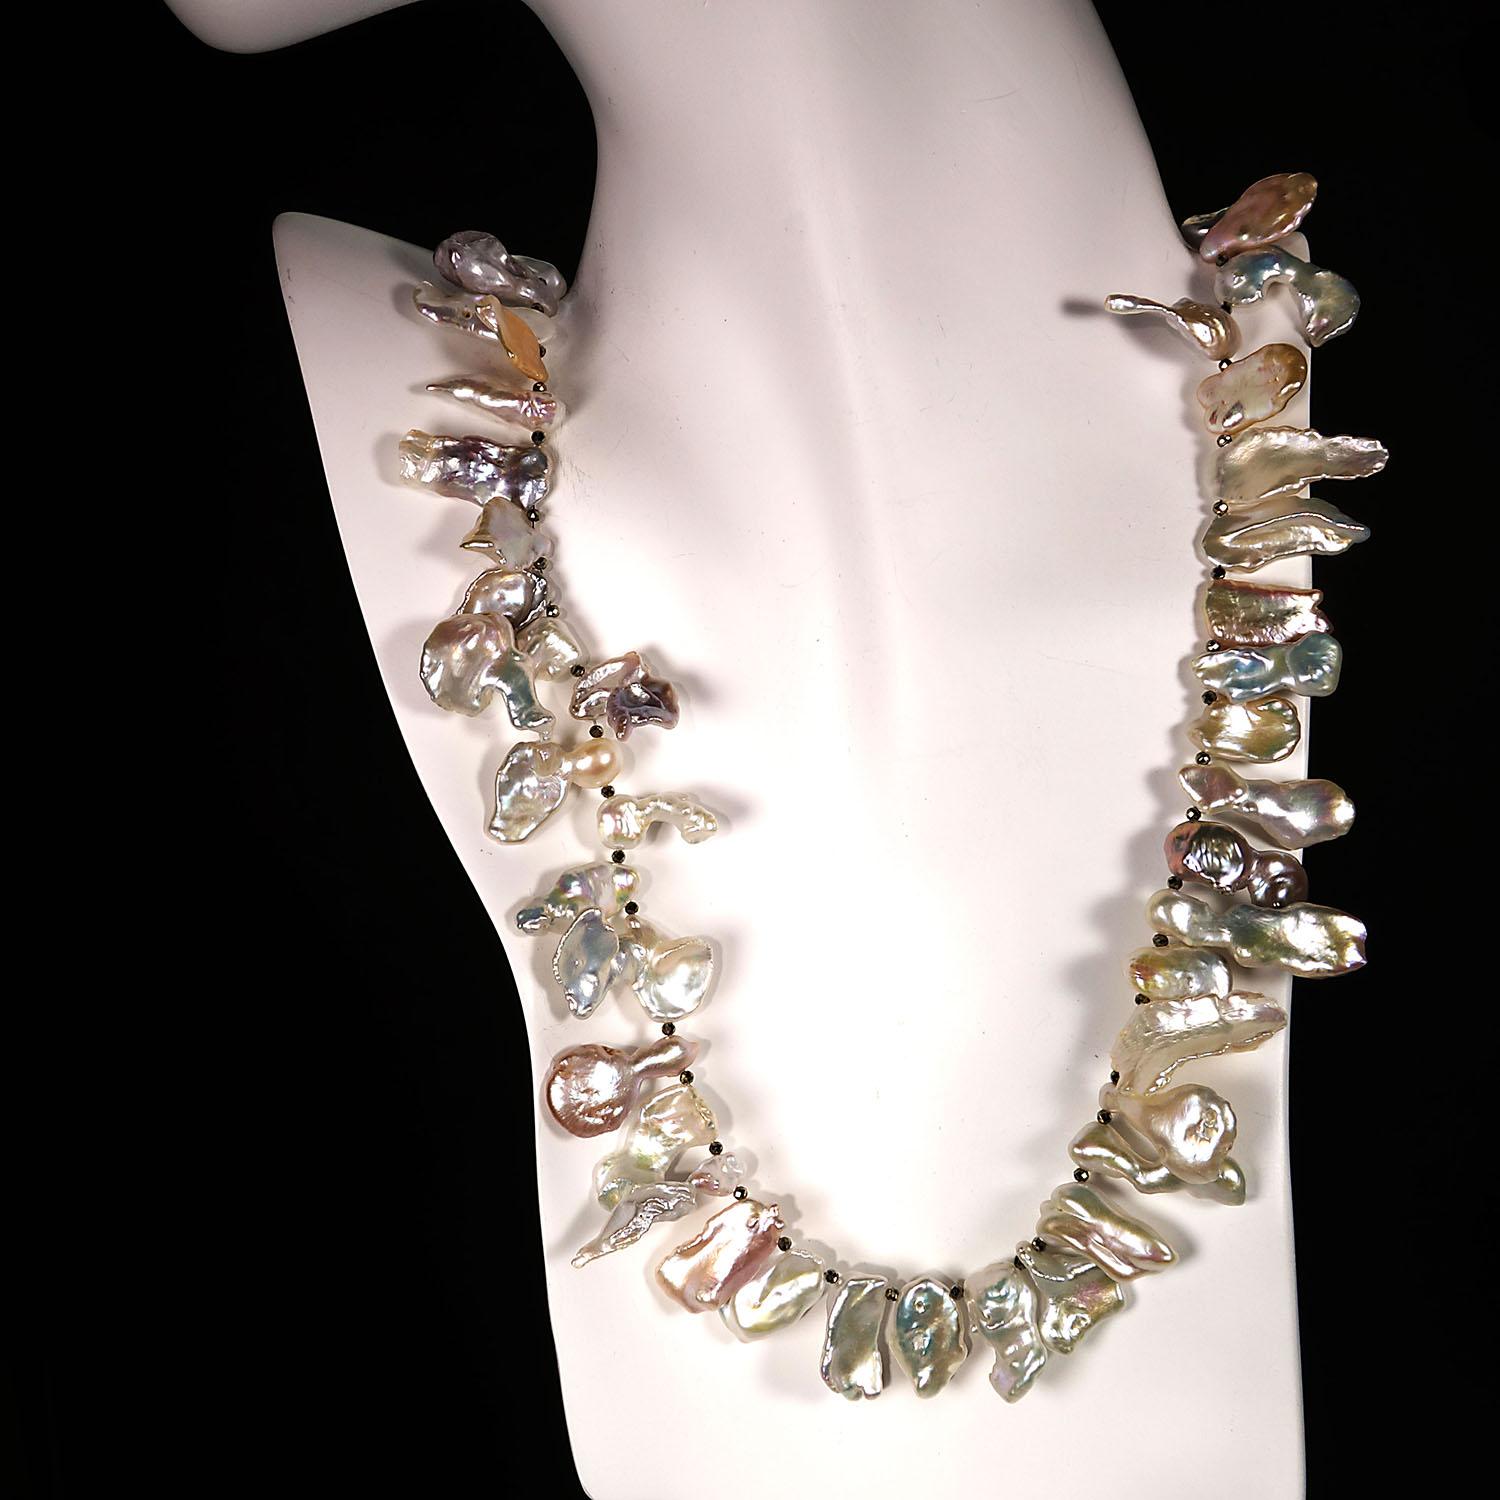 Bead AJD Freeform, Iridescent Pearls Necklace Pyrite accents   Fabulous Gift!!!